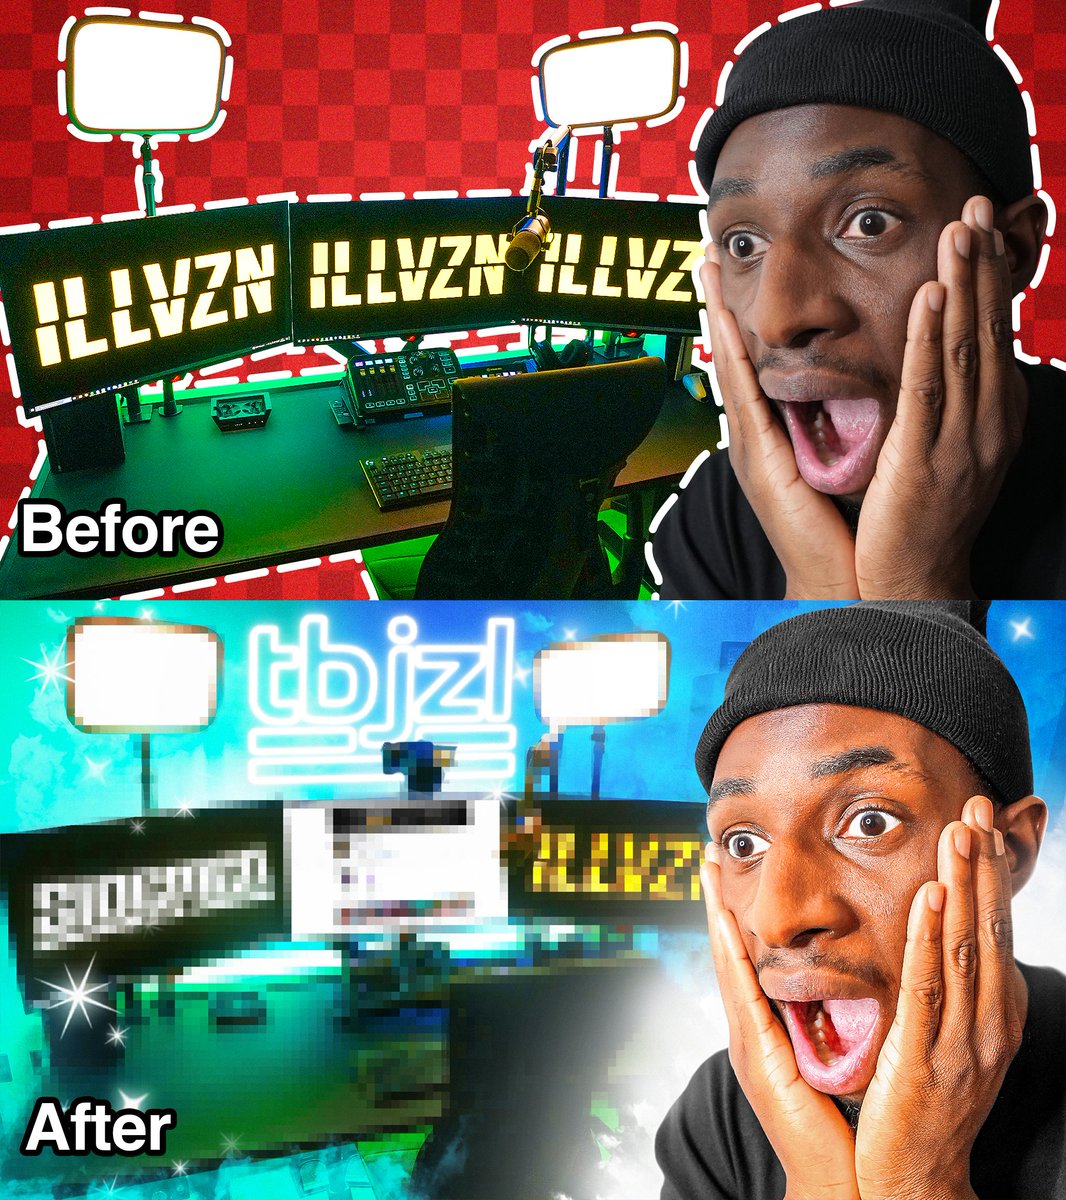 Recent Thumbnail for @samham__ ' Upgrading @Tobjizzle 's DREAM Gaming Setup! ' 🔁&❤️are much appreciated!🙏🏻